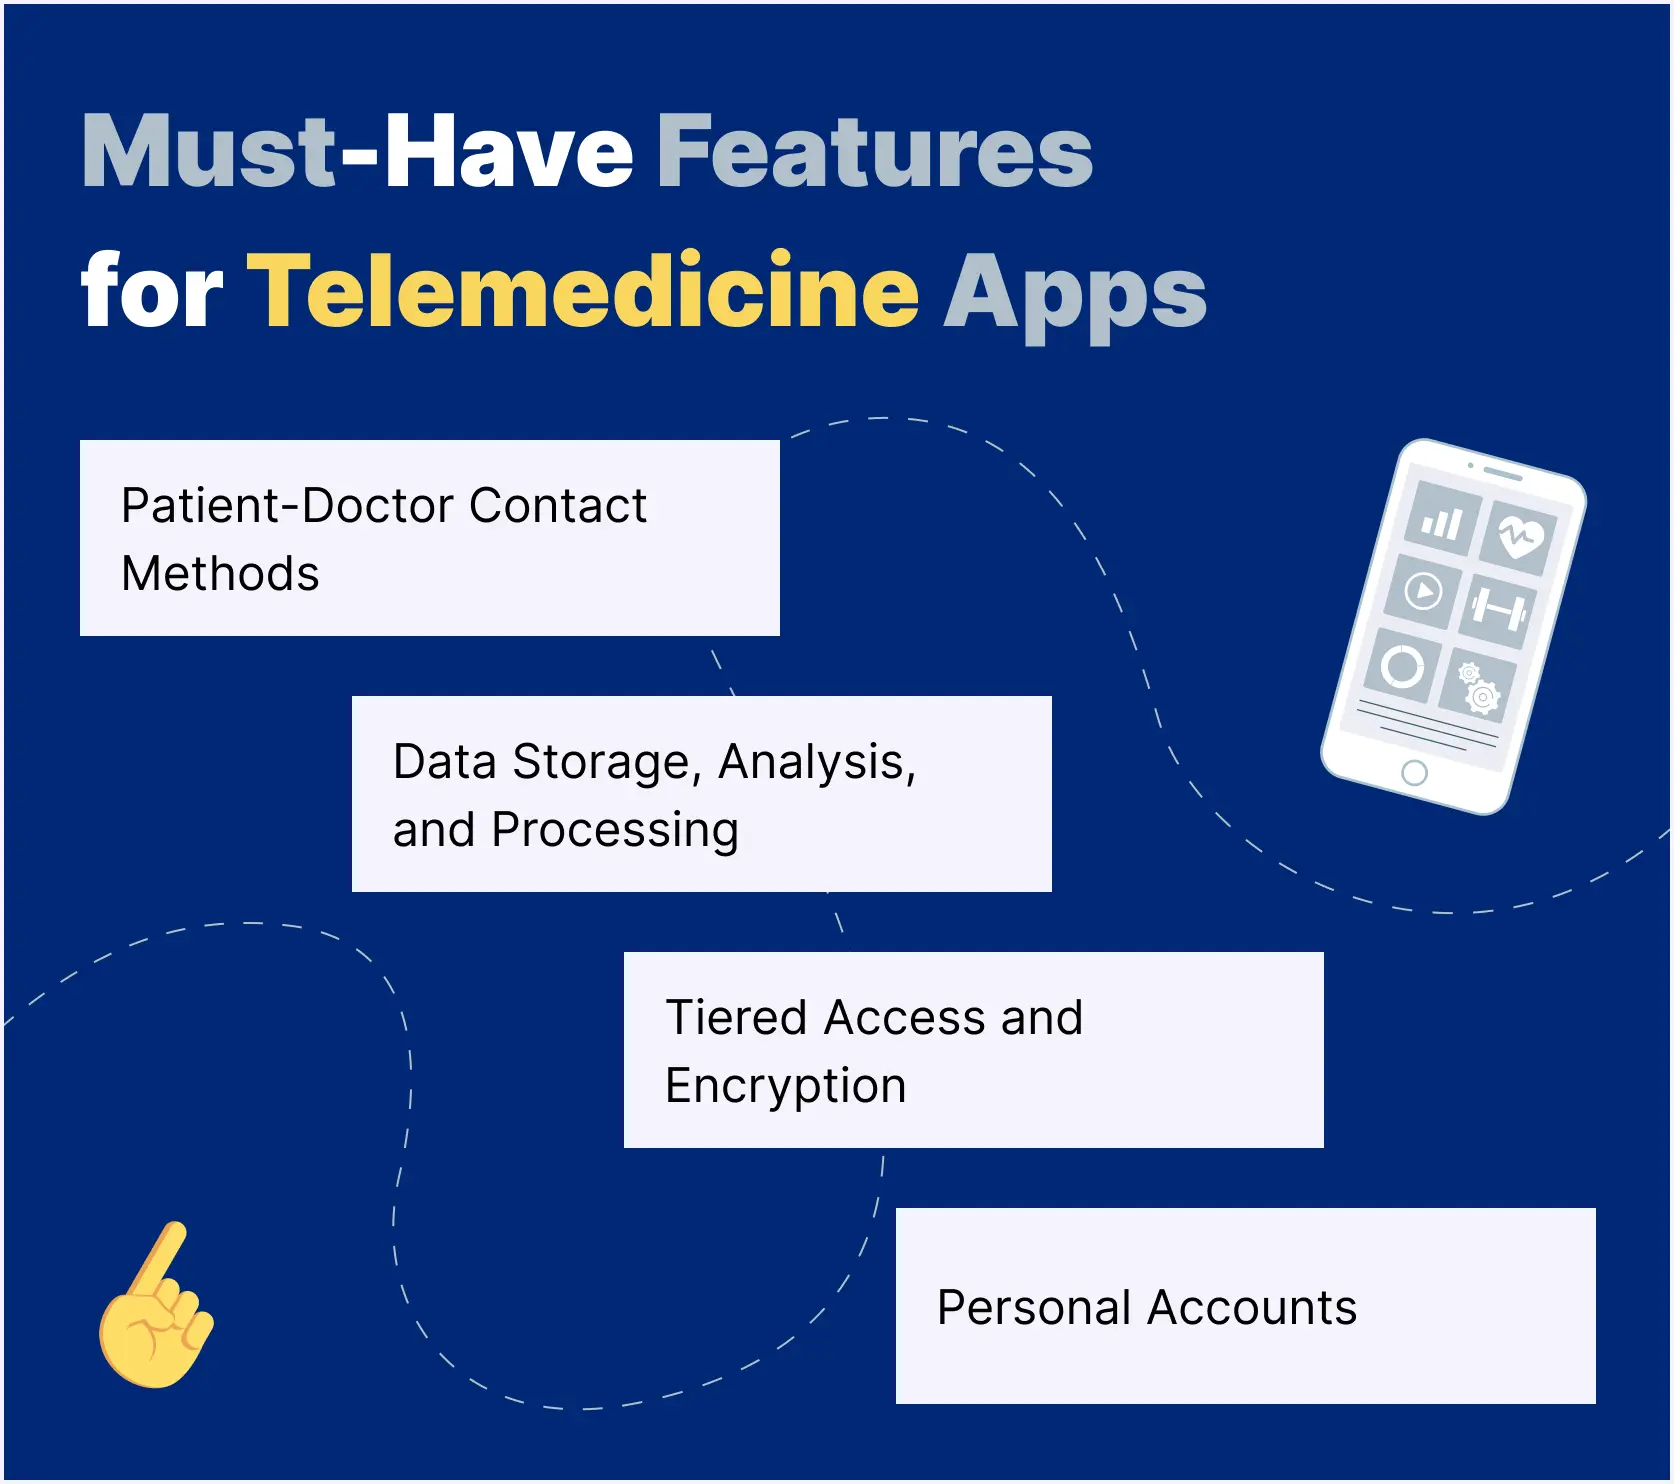 Must-Have Features for Telemedicine Apps.webp